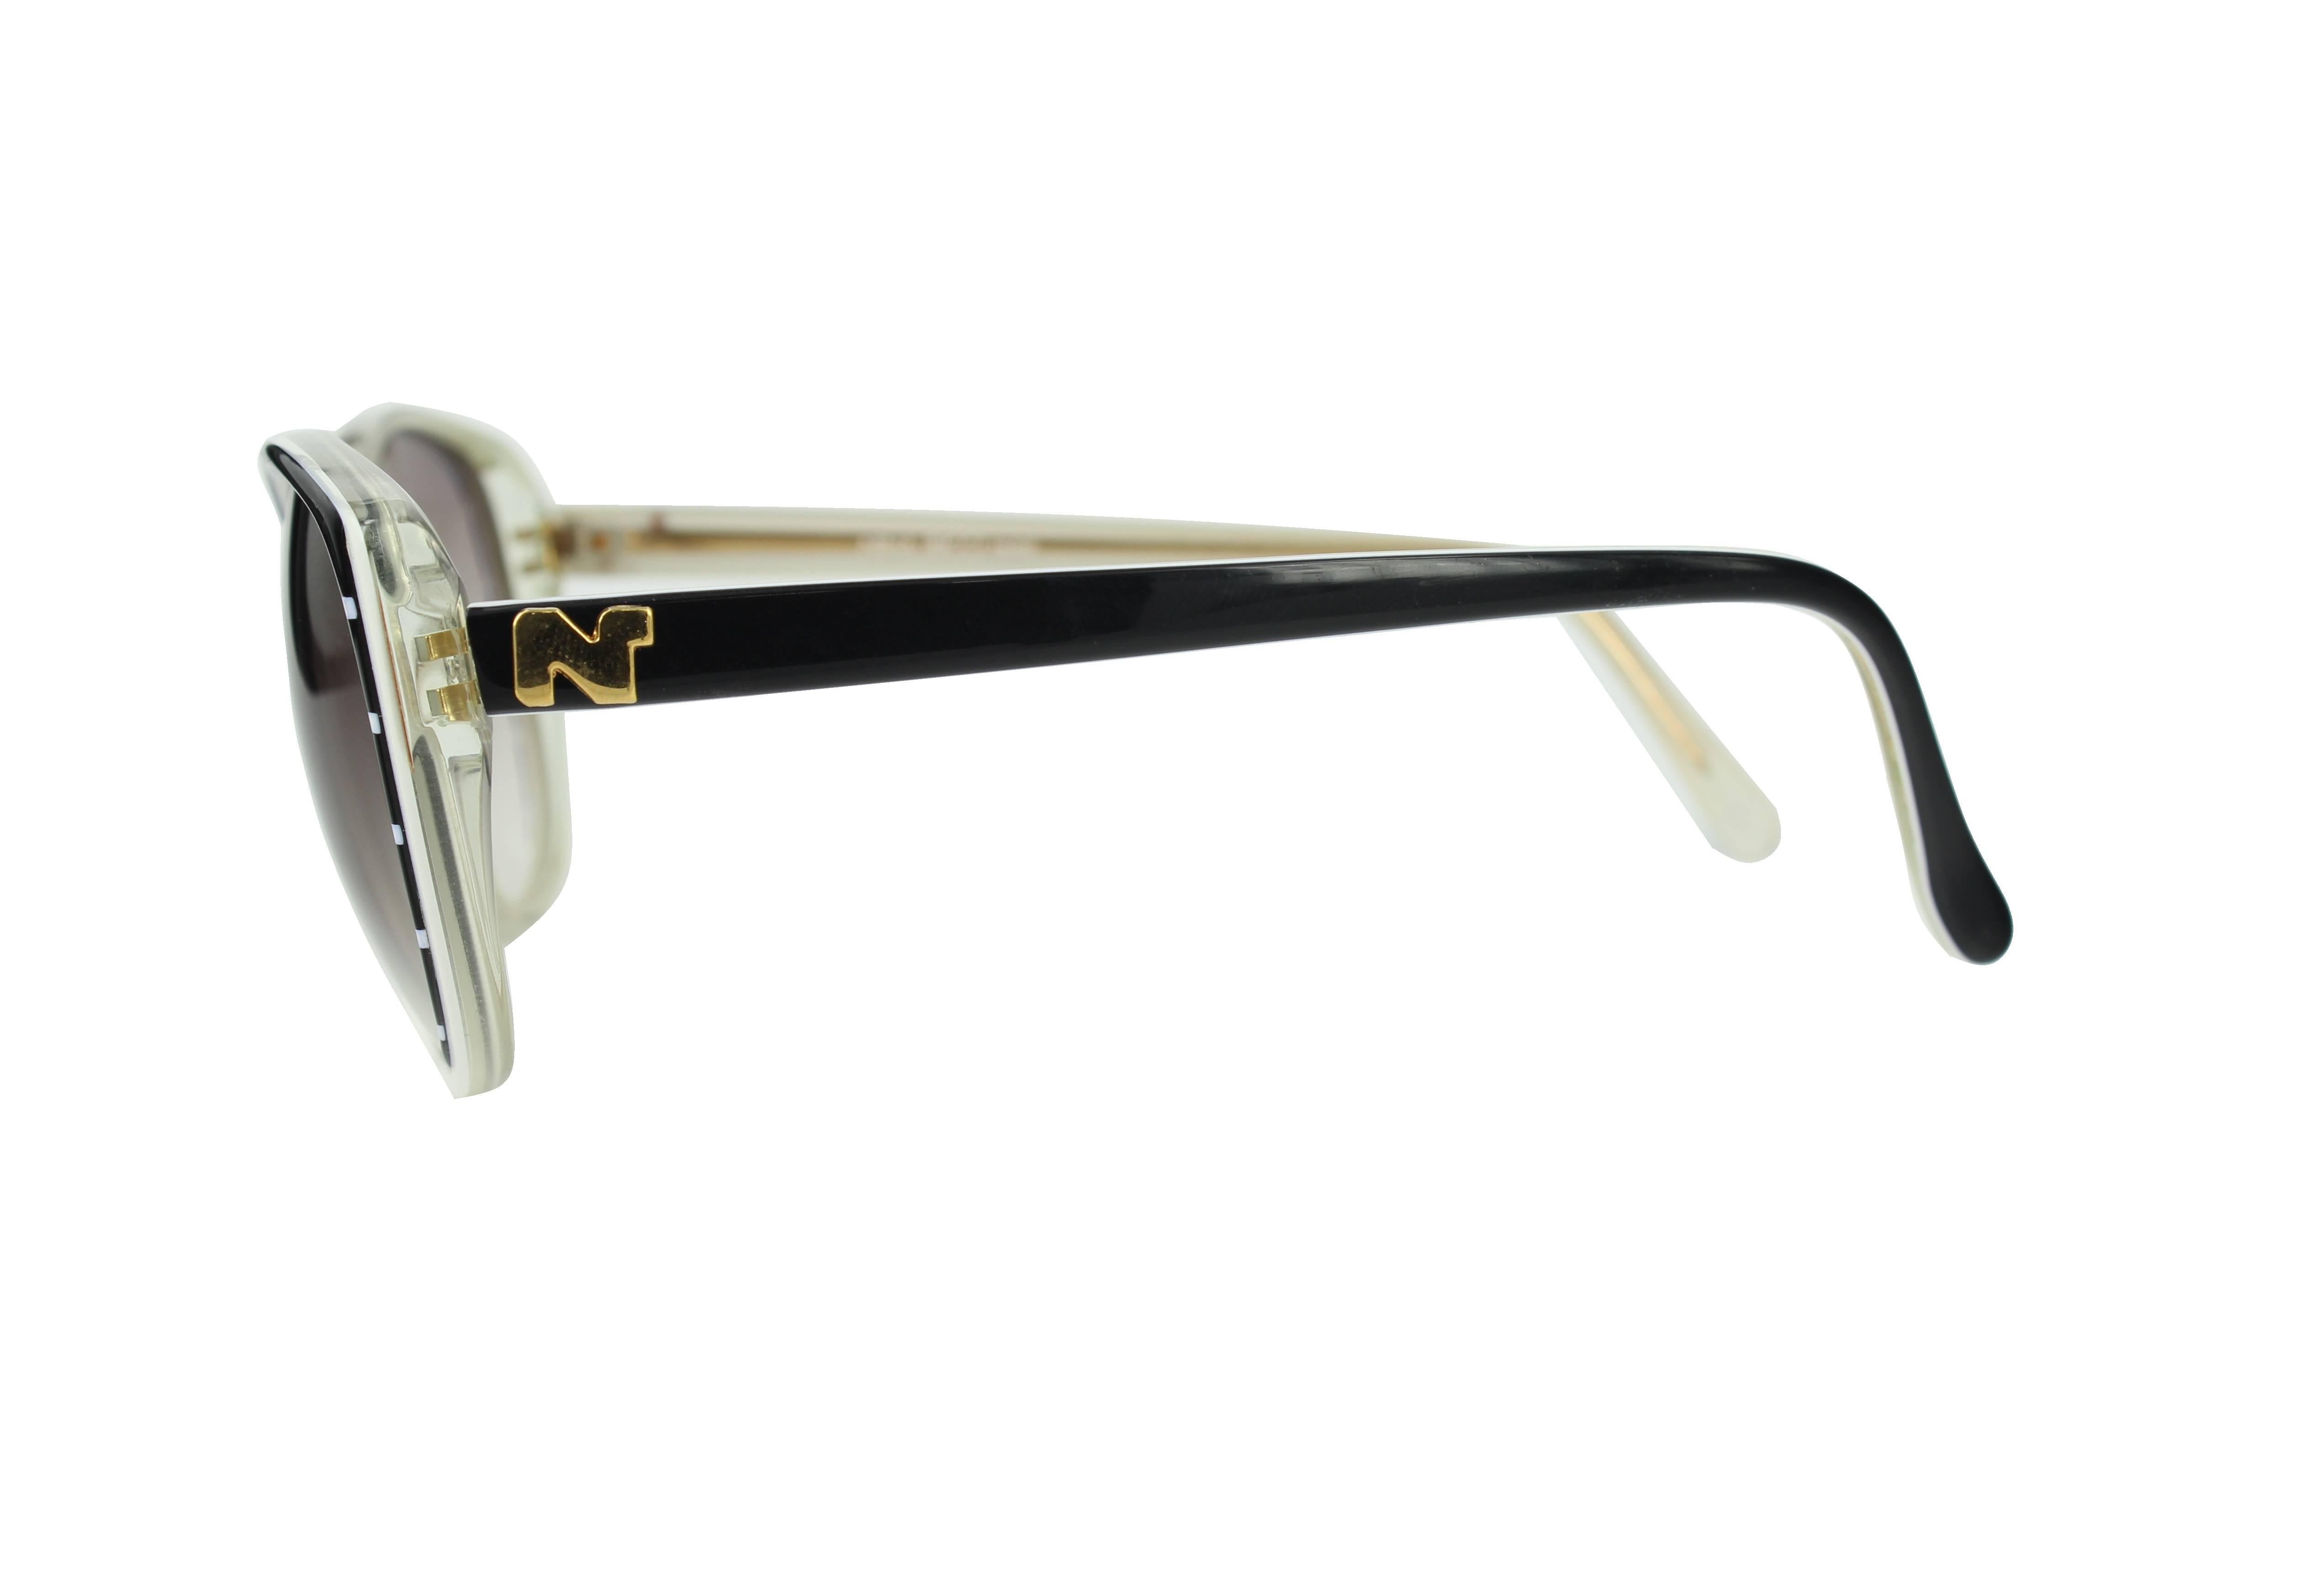 Exclusive model designed and manufactured in the 70s by the prestigious French brand Nina Ricci.
It is a unique high quality handmade piece made of acetate. On both sides, on the rods, it has the distinctive "N" characteristic of the